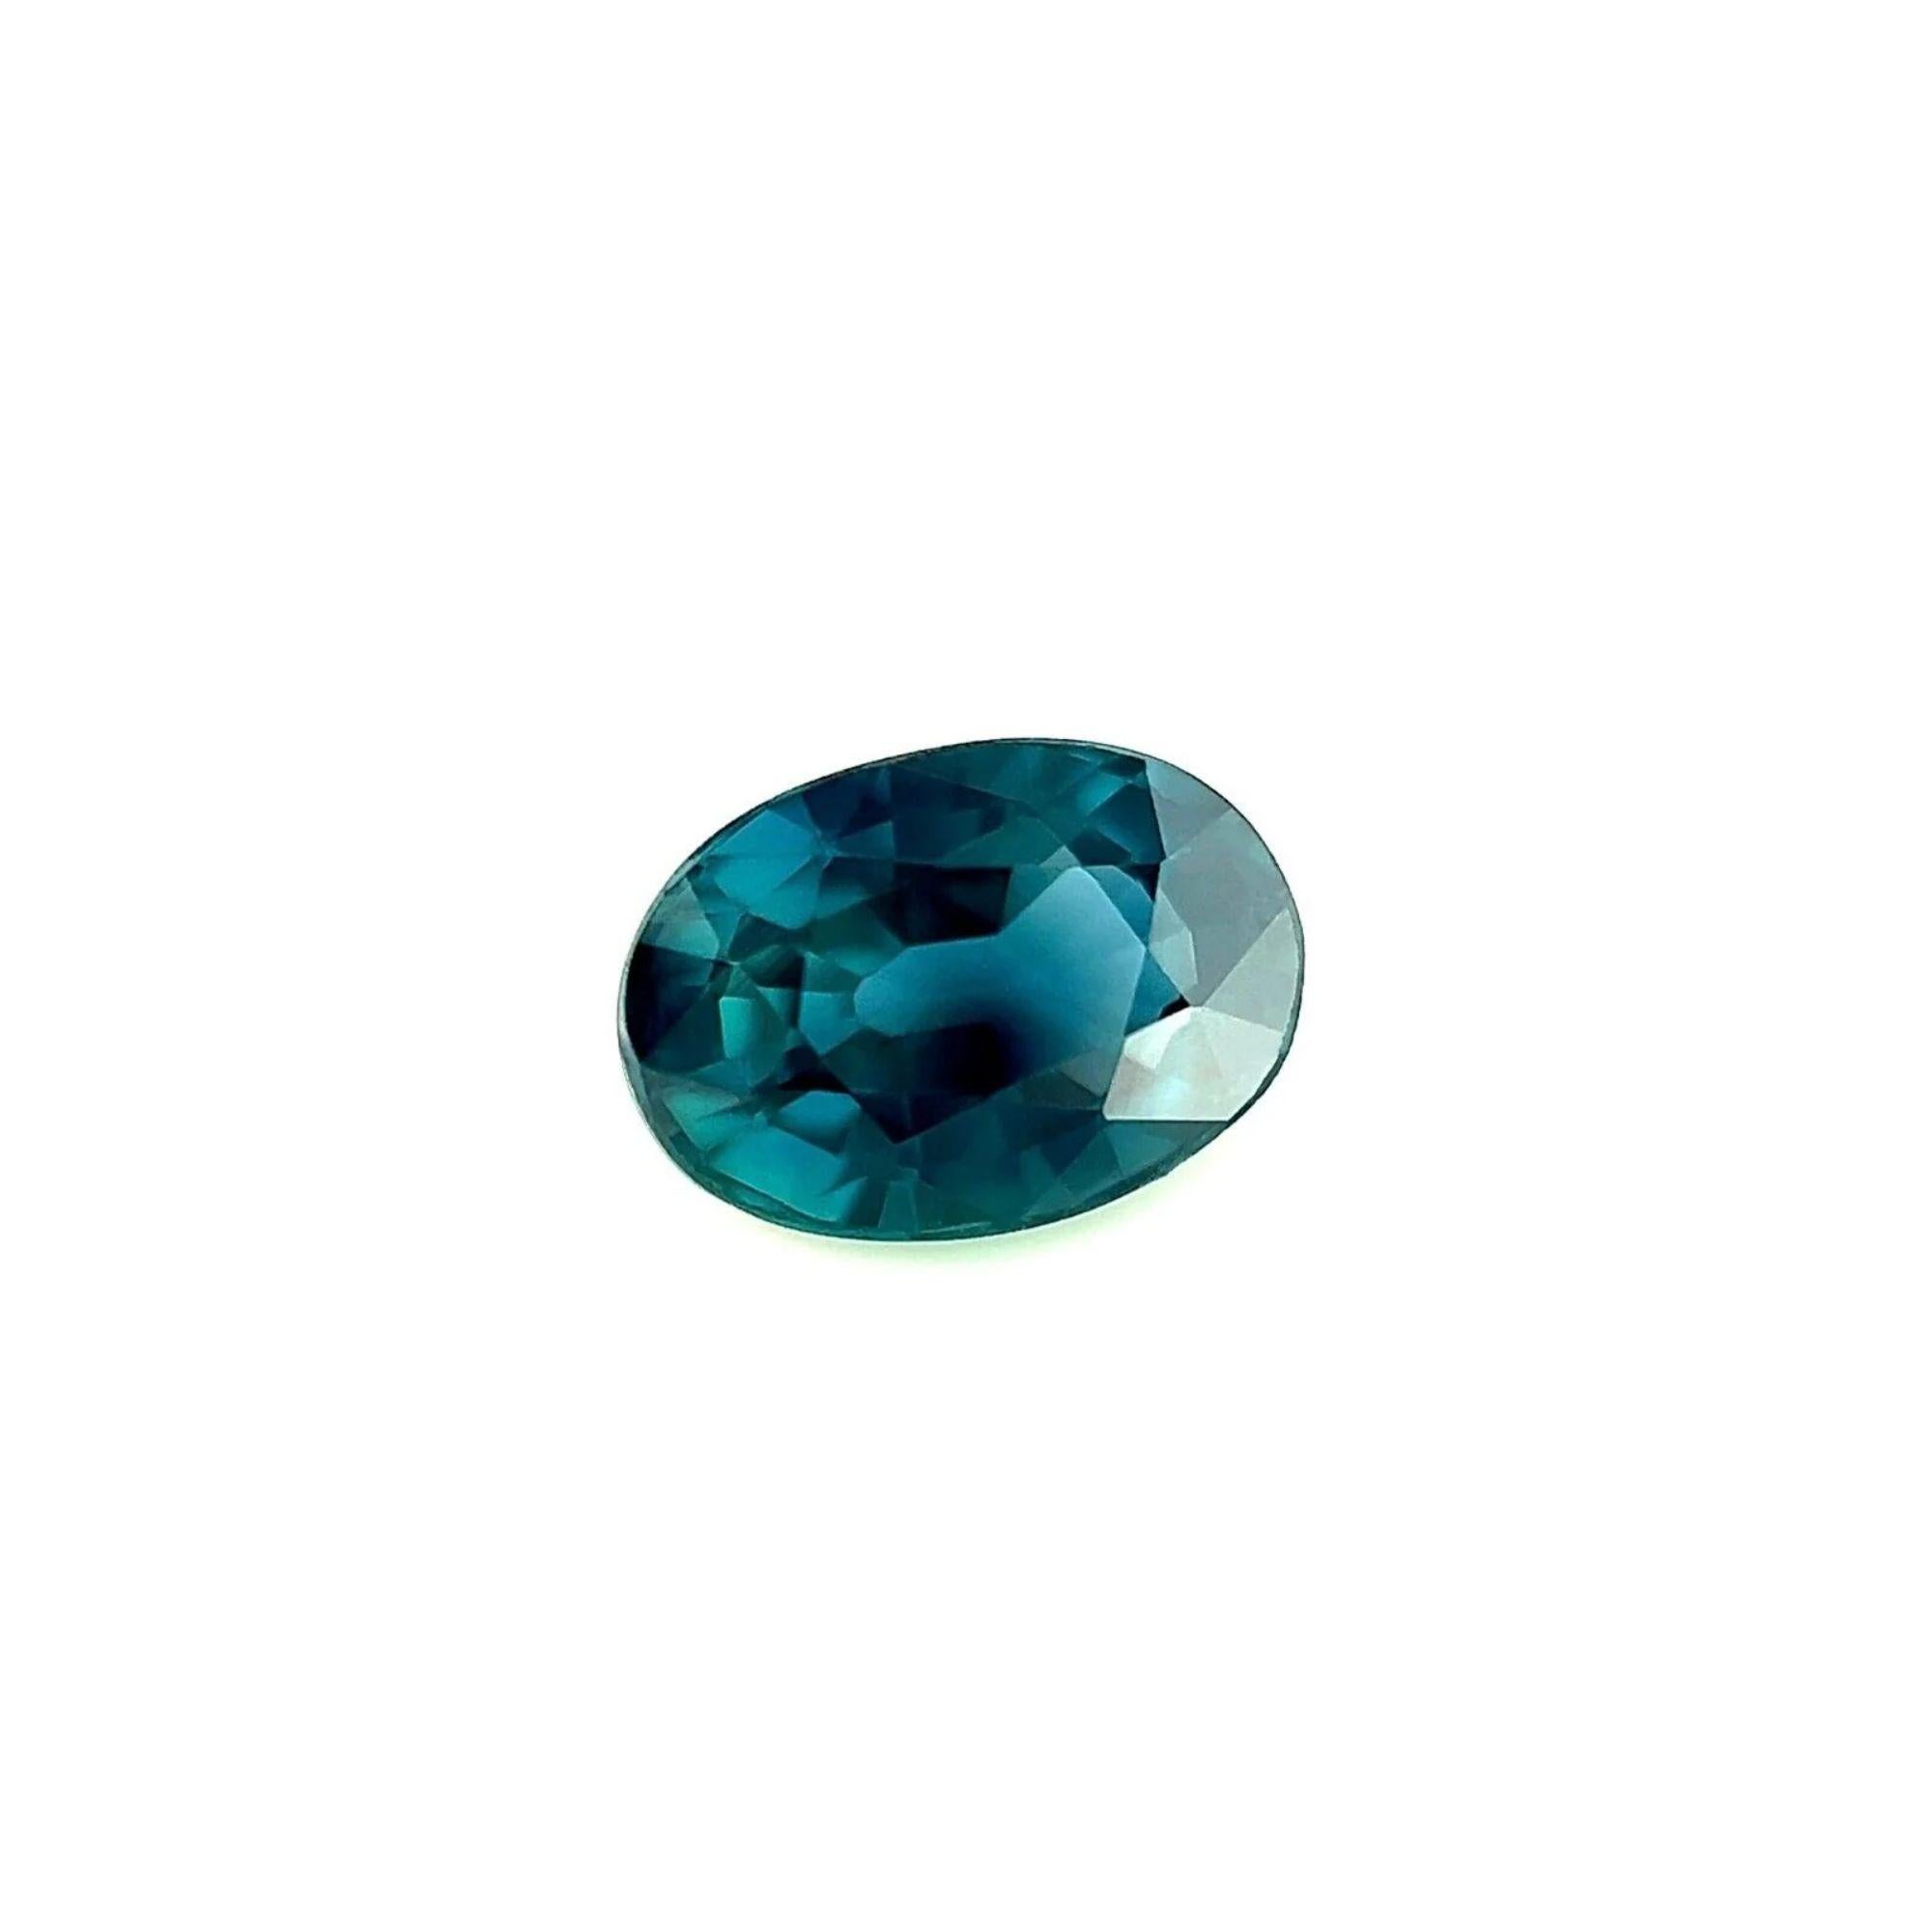 1.14ct Rare Sapphire GIA Certified Fine Deep Blue Untreated Oval Cut Gemstone

GIA Certified Untreated Deep Blue Sapphire Gemstone.
1.14 Carat unheated sapphire with a deep blue colour. Unique and top grade gem.
This sapphire also has very good